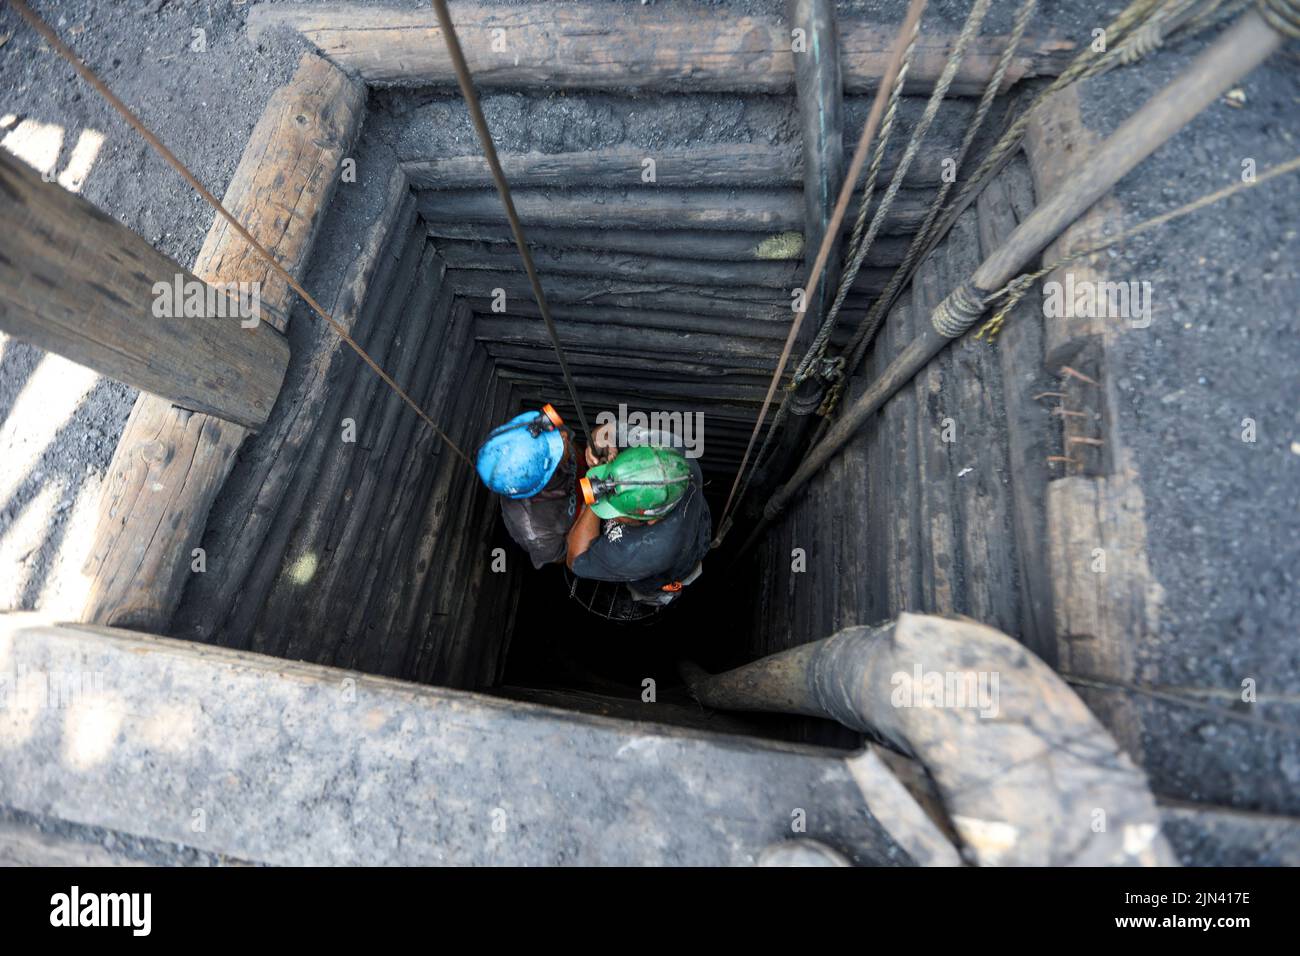 Miners descend into an artisanal coal mine, or 'pocito' (little hole), known for their rudimentary and often dangerous mining techniques, in Sabinas, Coahuila state, Mexico, August 8, 2022. REUTERS/Luis Cortes Stock Photo